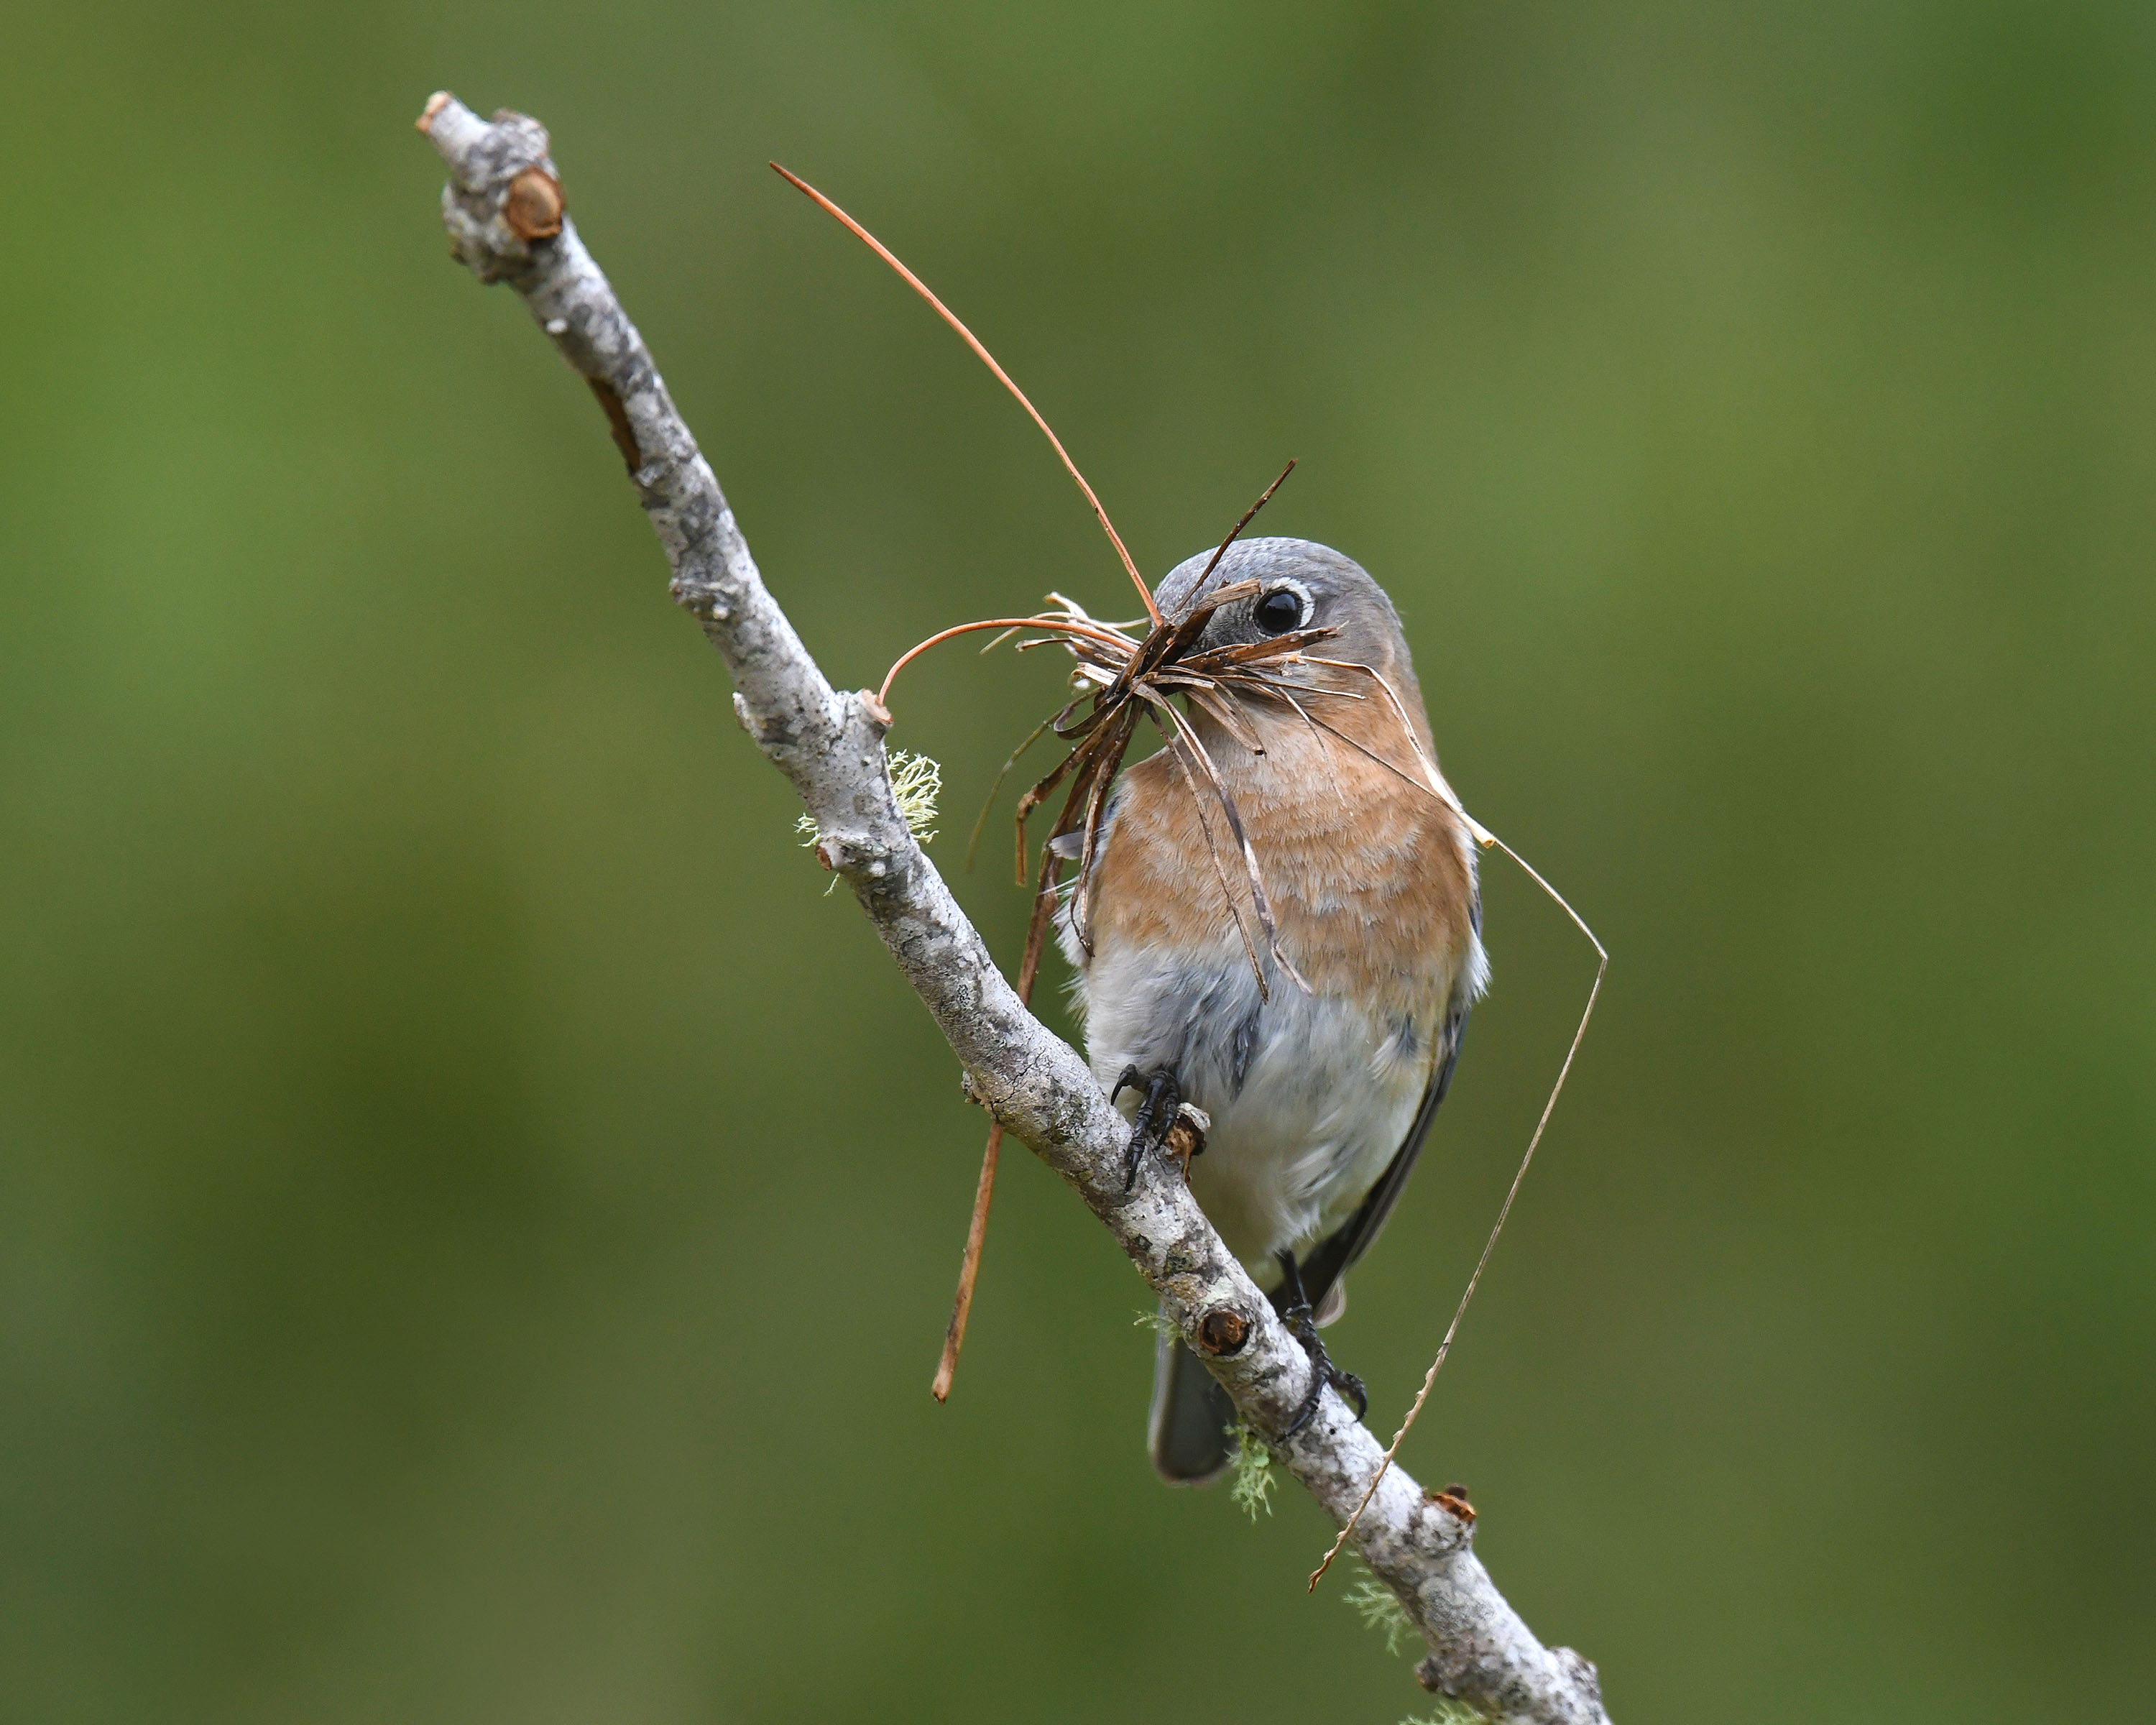 An Eastern Bluebird sitting on a branch with smaller twigs in its beak.